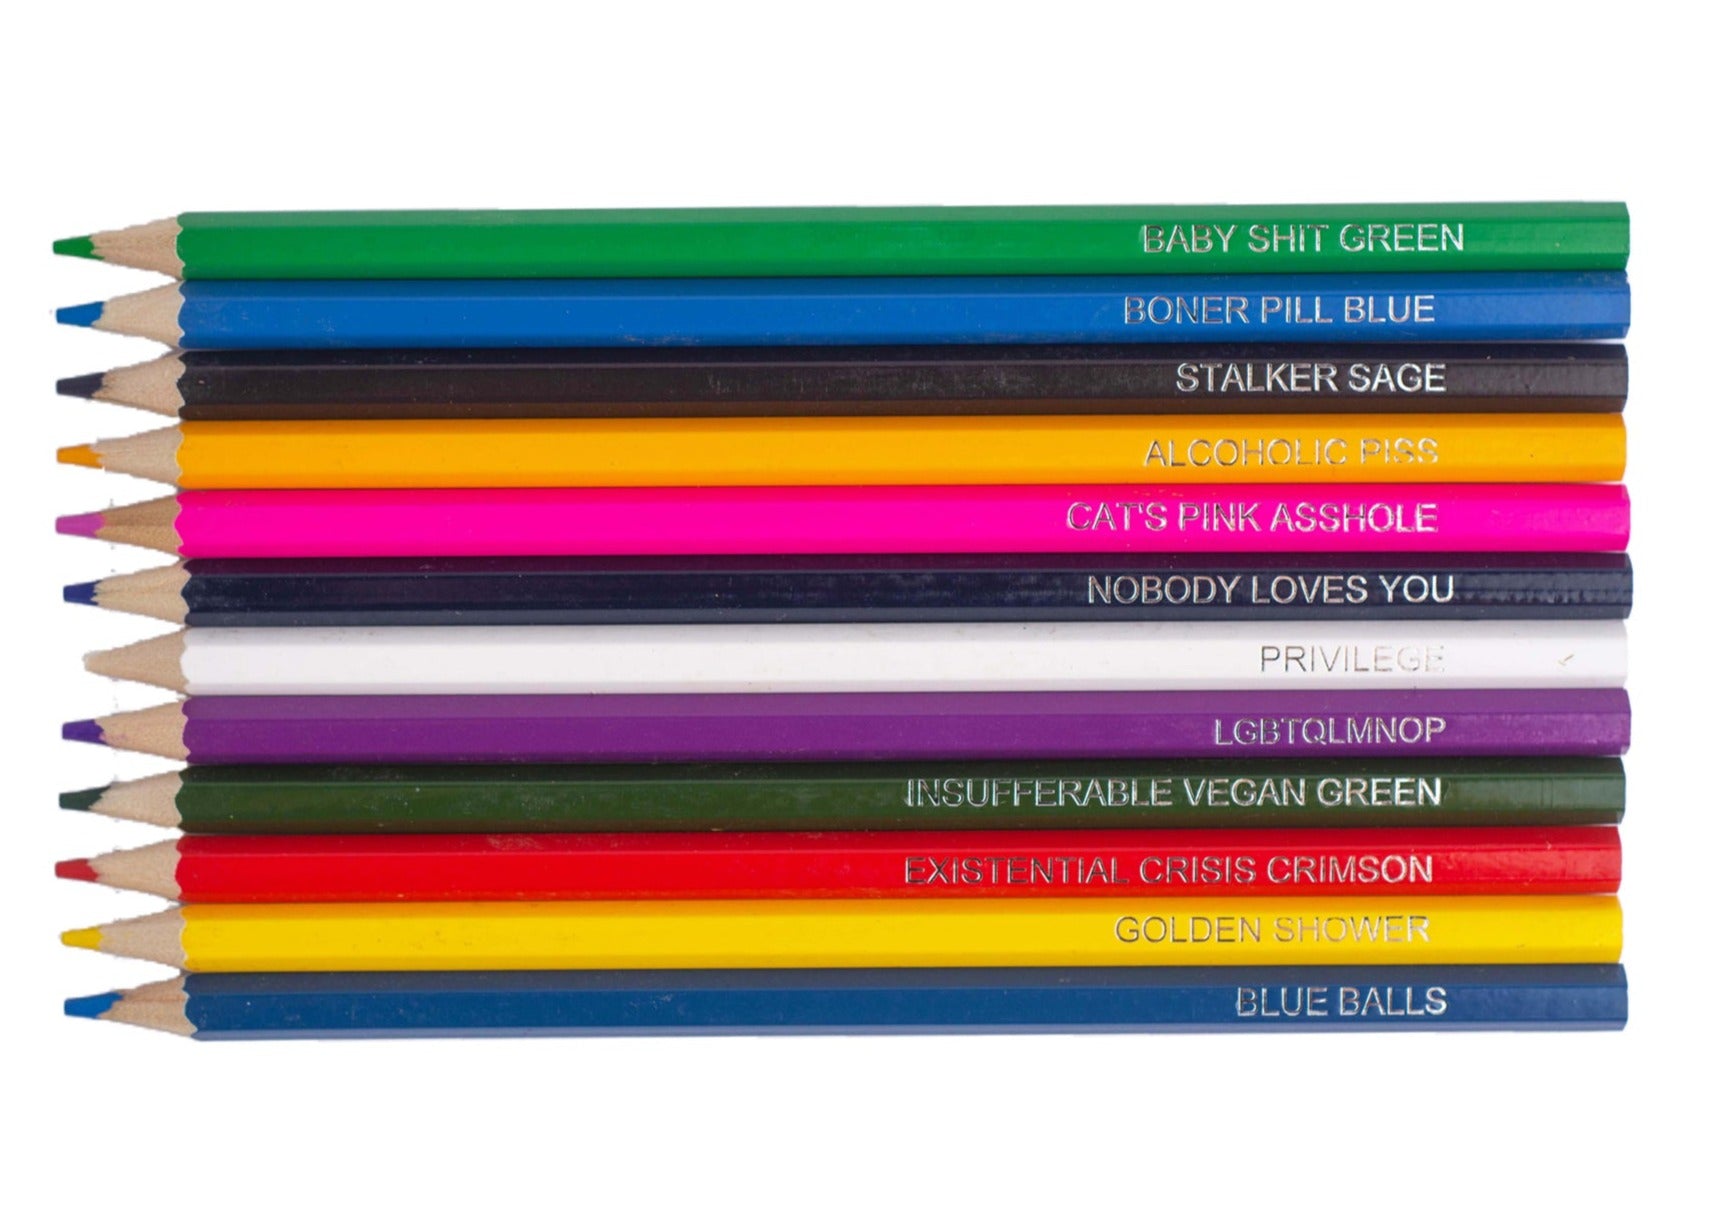 Offensive Colored Pencils - Offensive Crayons